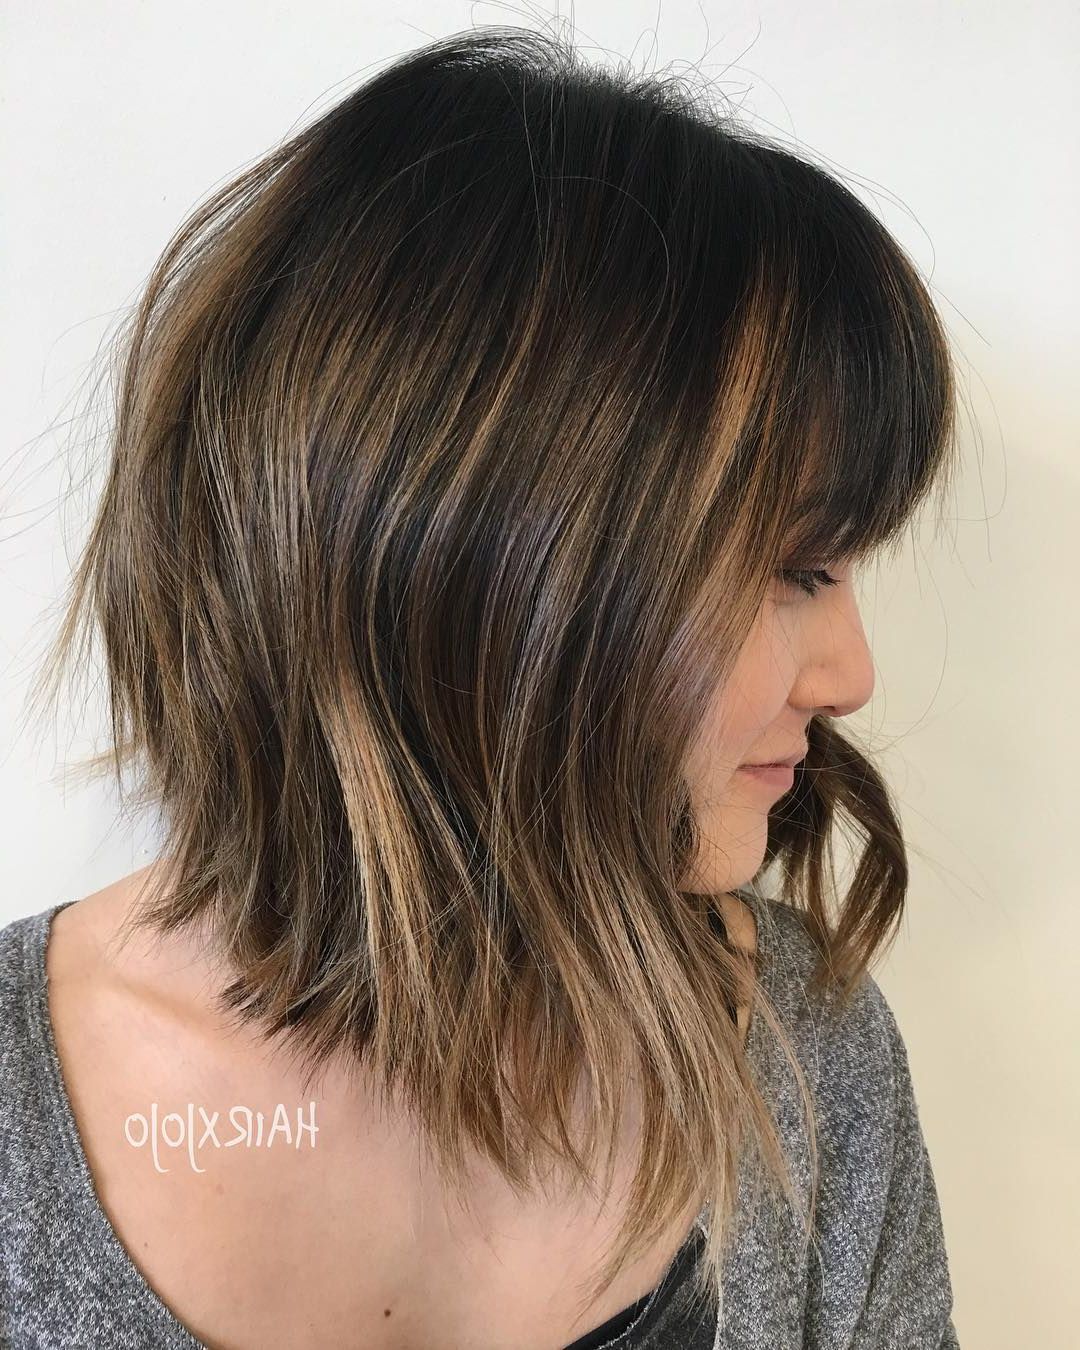 Widely Used Medium Bob With Long Parted Bangs Inside 42 Trendiest Long Bob With Bangs + What To Consider Before Getting This (View 6 of 20)